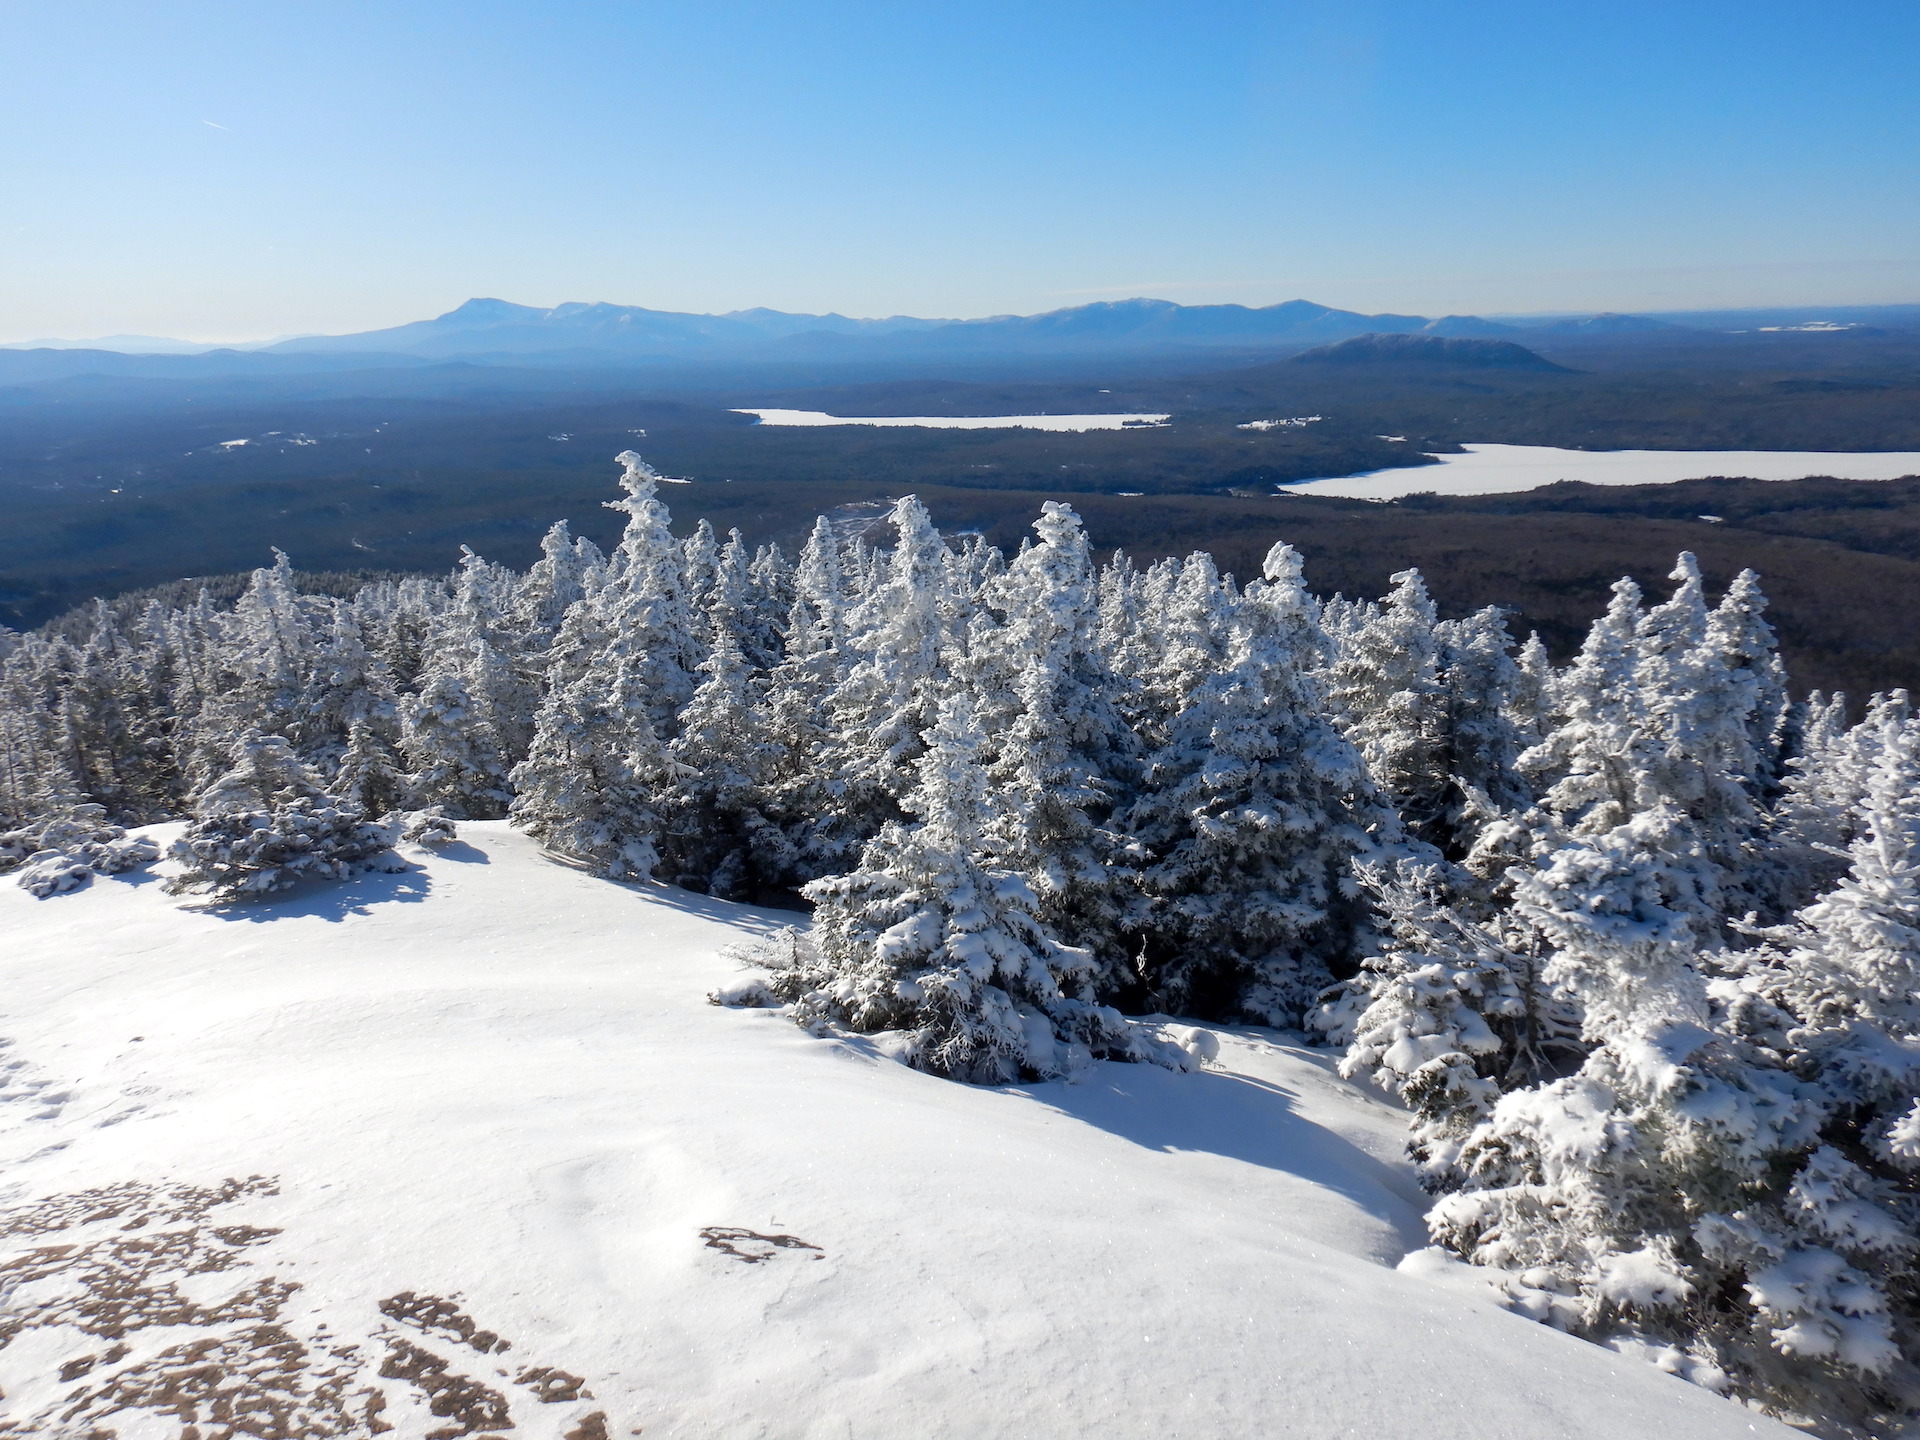 View from a mountain of a forested landscape. A ridge of large mountains form the horizon, although they appear small in the photo. Snow covered trees form the foreground just above windswept rock. Frozen ponds and forest sit in between the